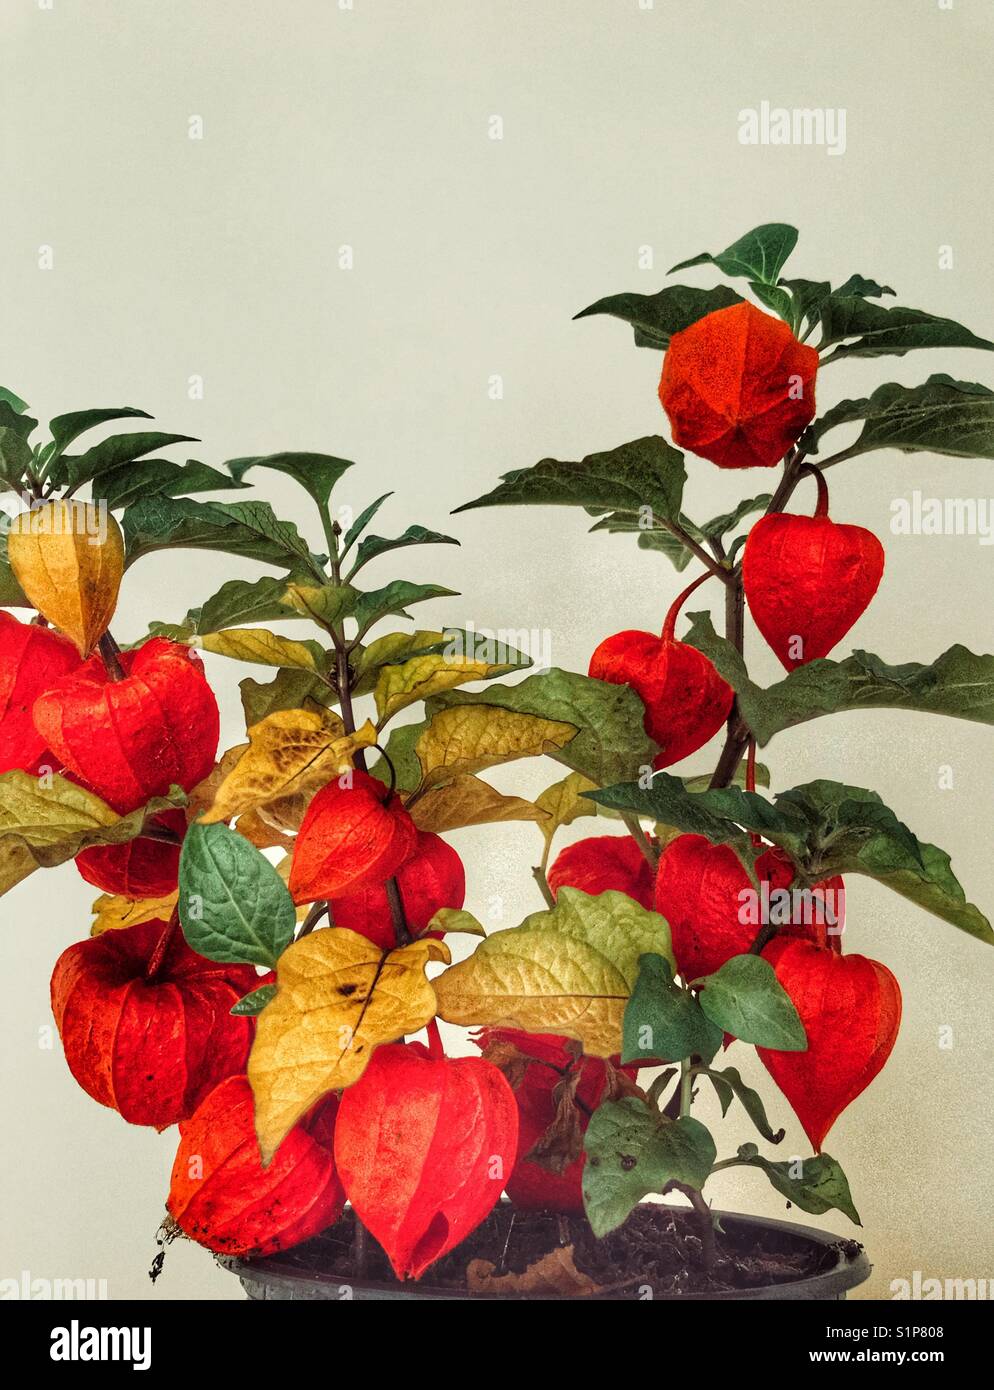 Physalis alkekengi, also known as Ornamental physalis, Chinese Lampion or Chinese Lantern Plant. Inedible and toxic. Stock Photo